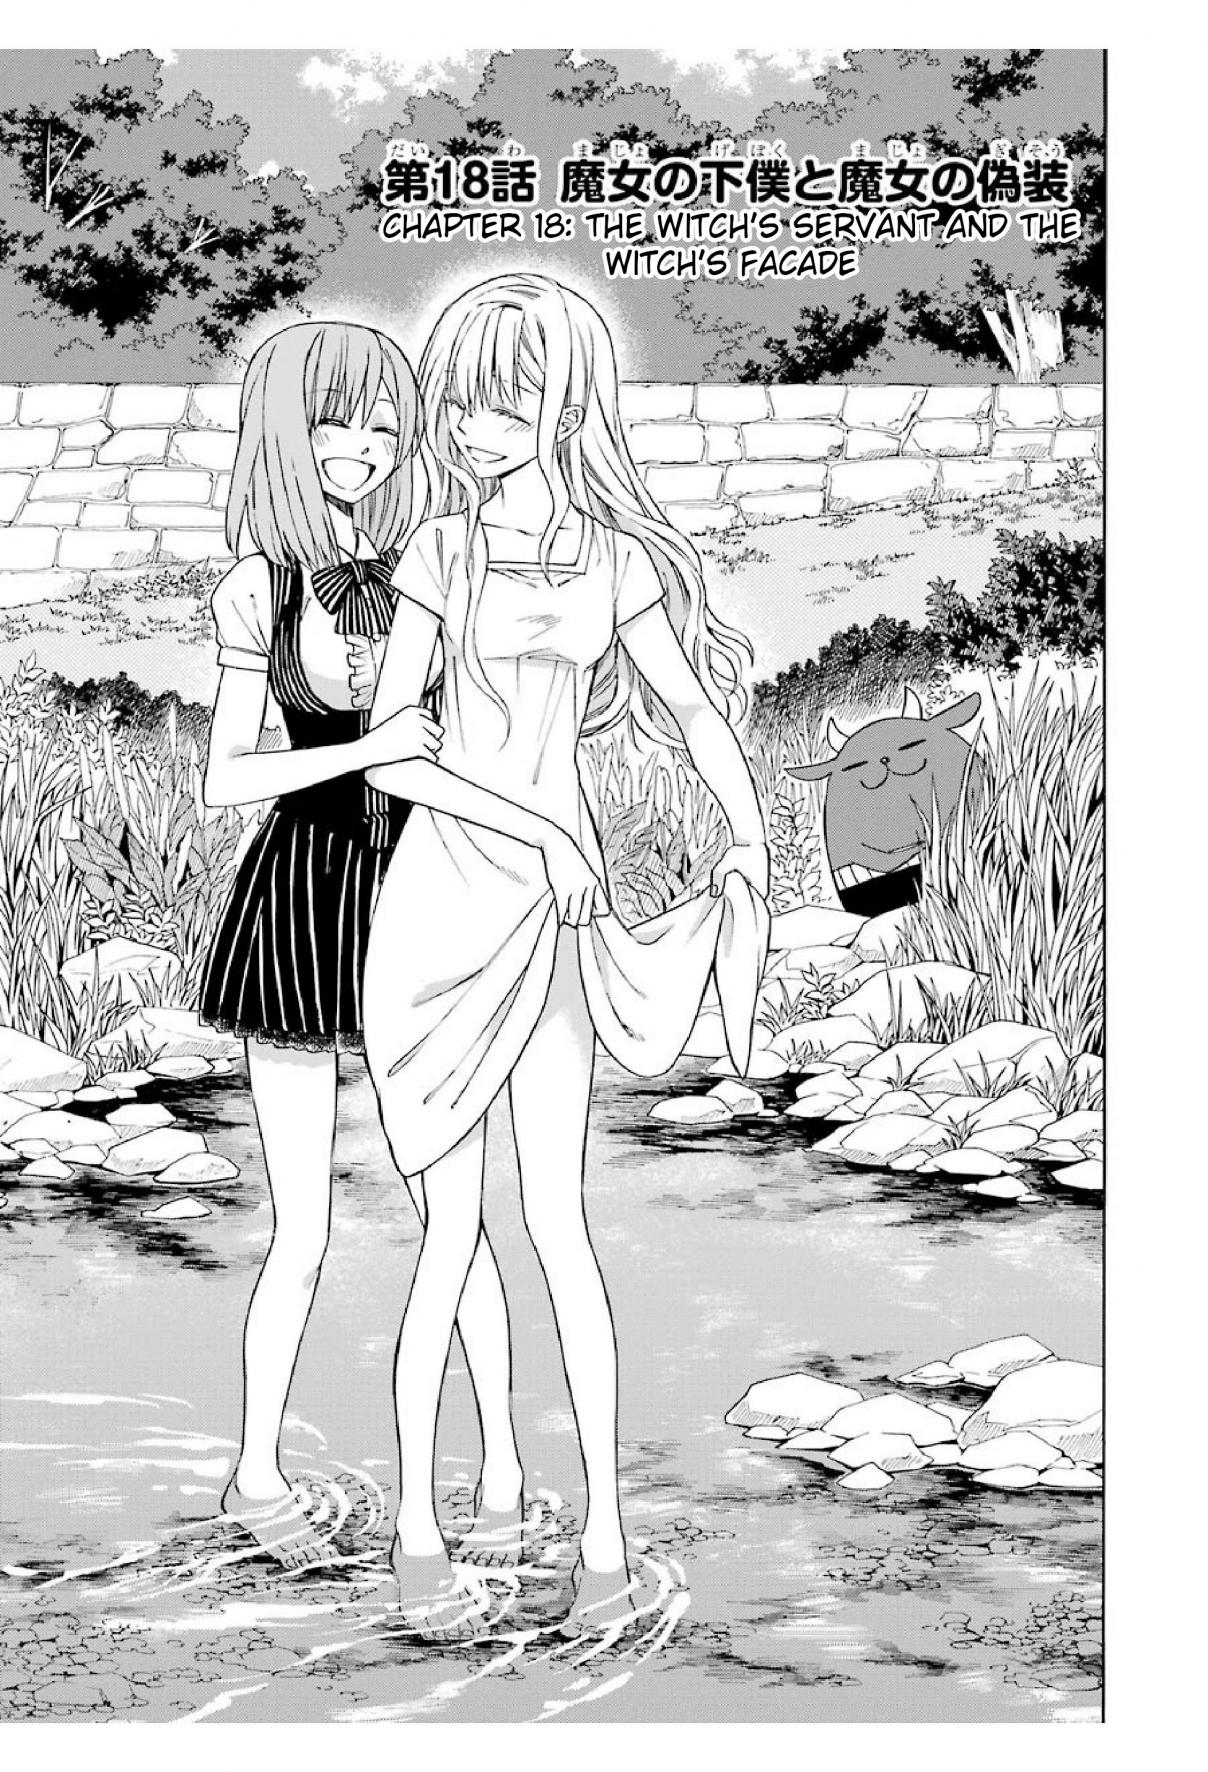 Majo no Geboku to Maou no Tsuno Ch. 18 The Witch's Servant and the Witch's Facade